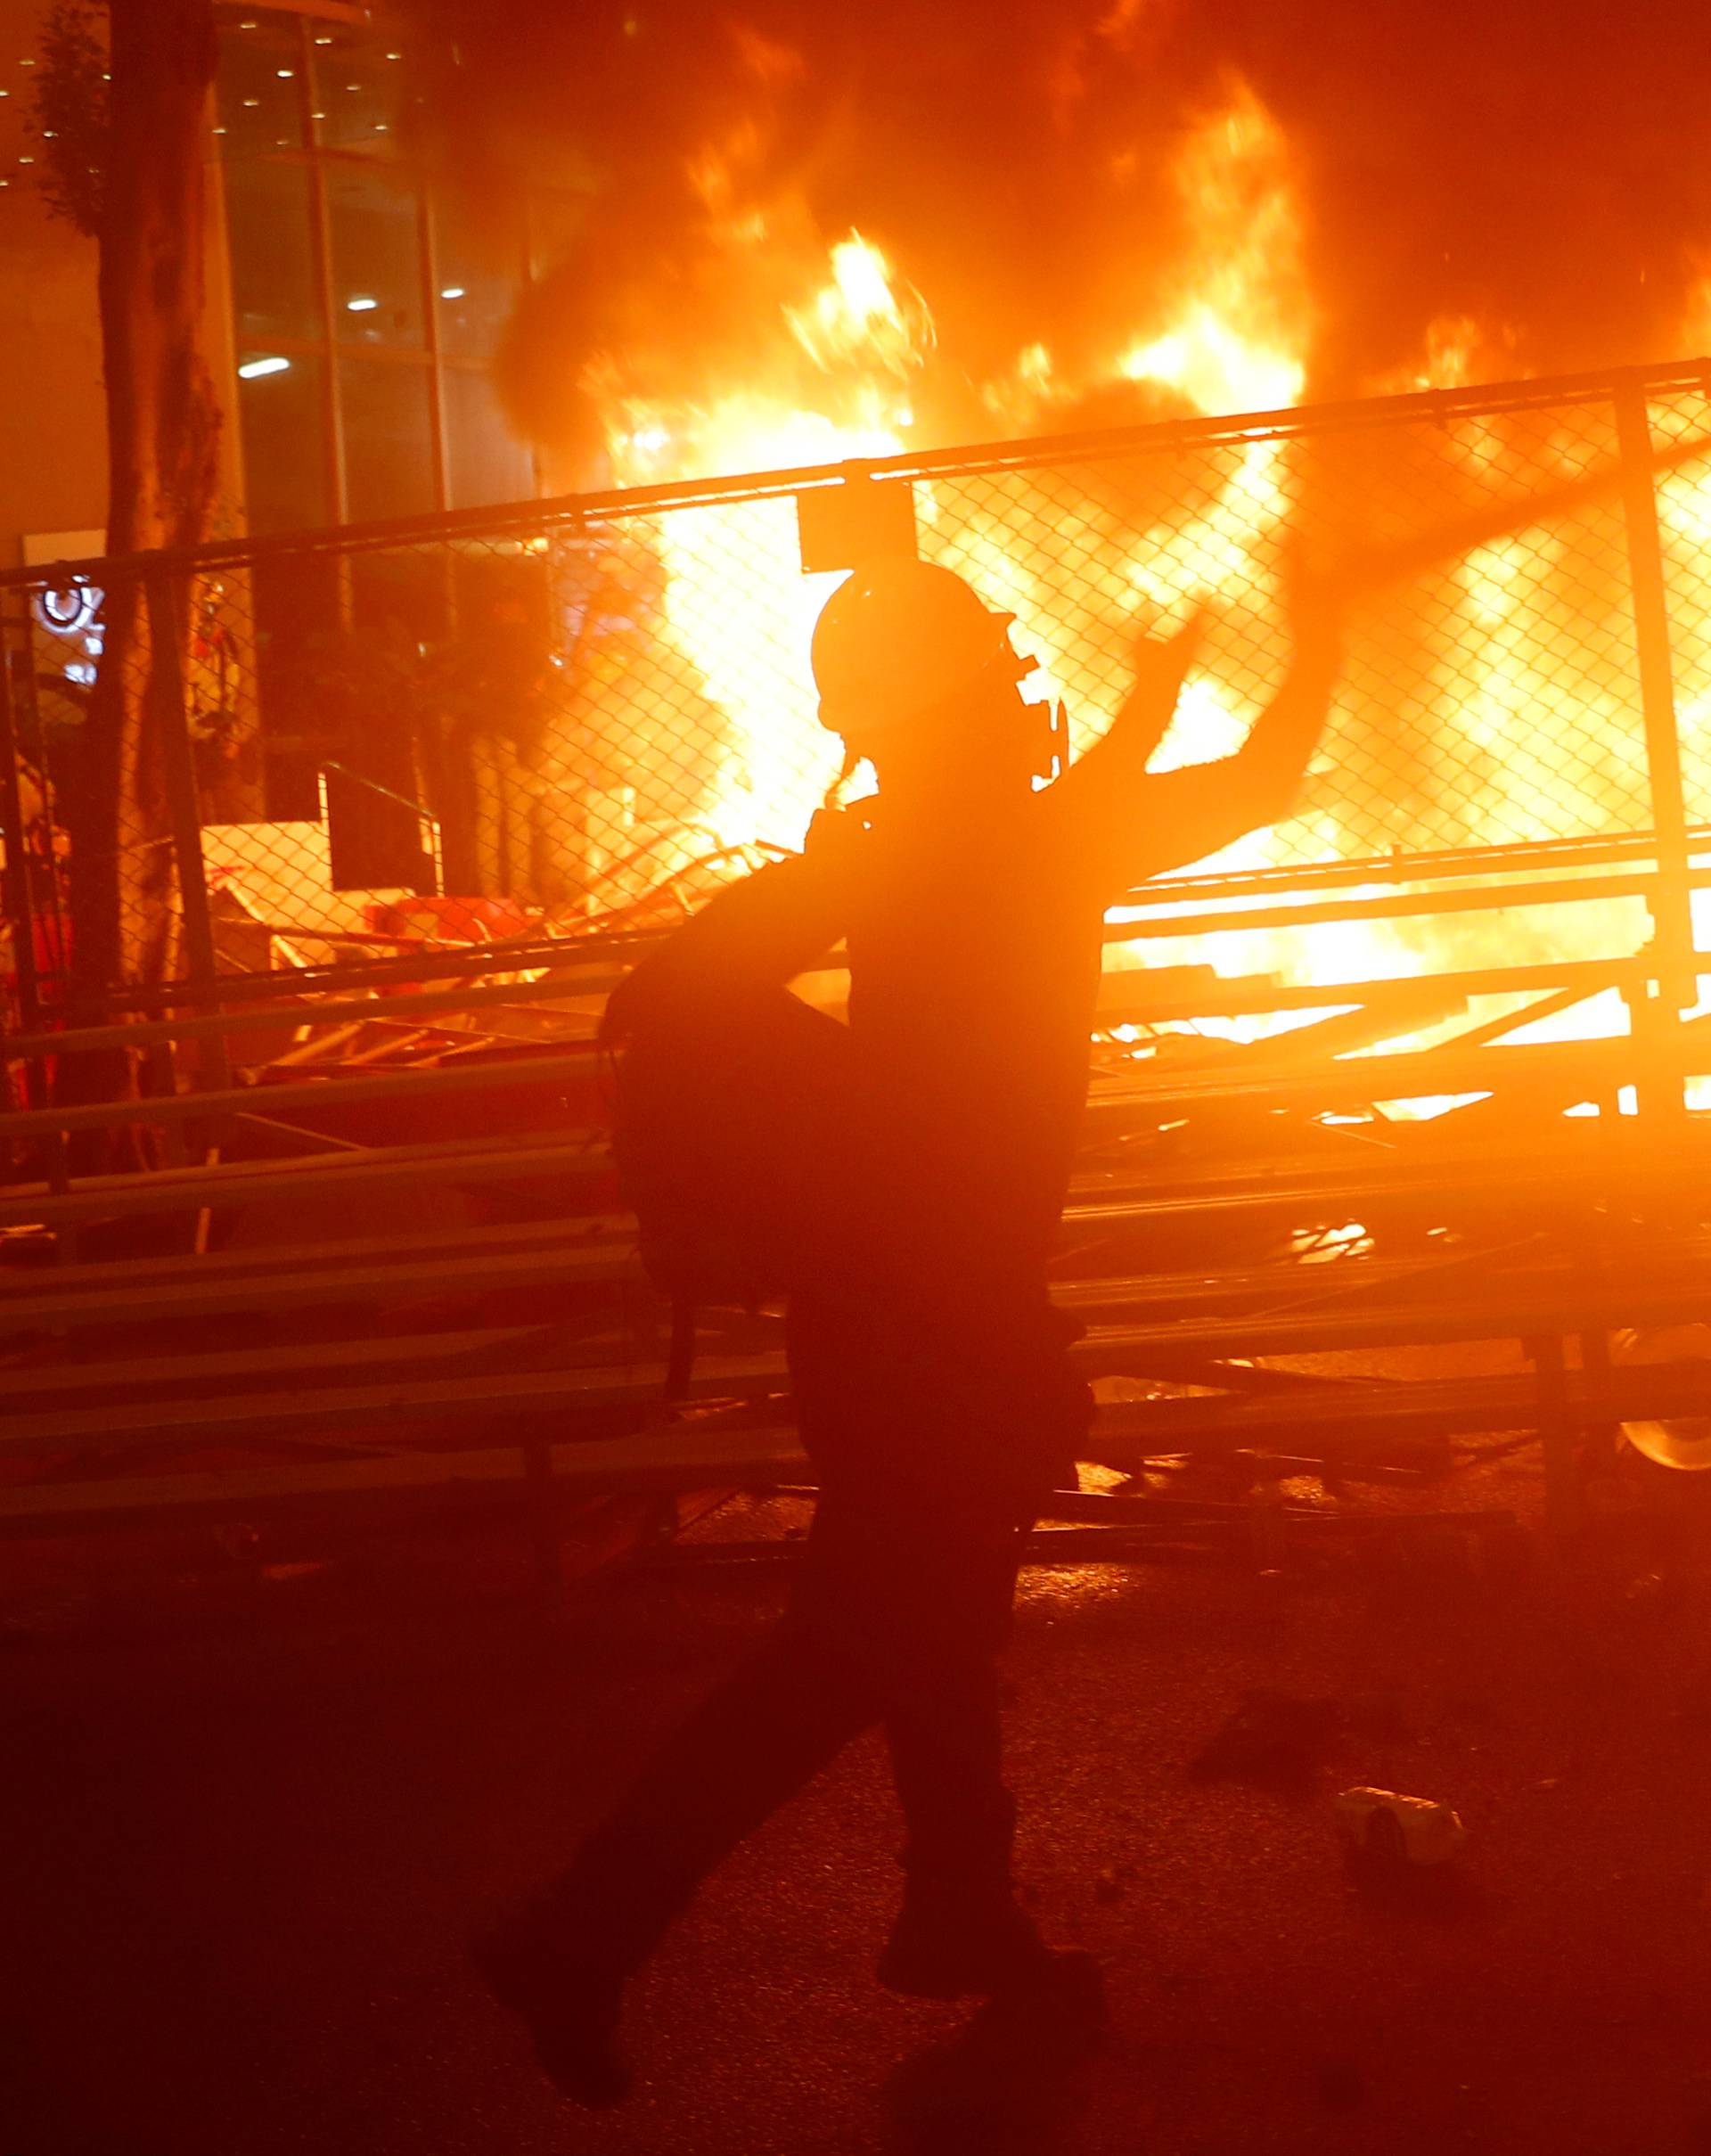 A demonstrator stands next to a burning barricade during a protest in Hong Kong